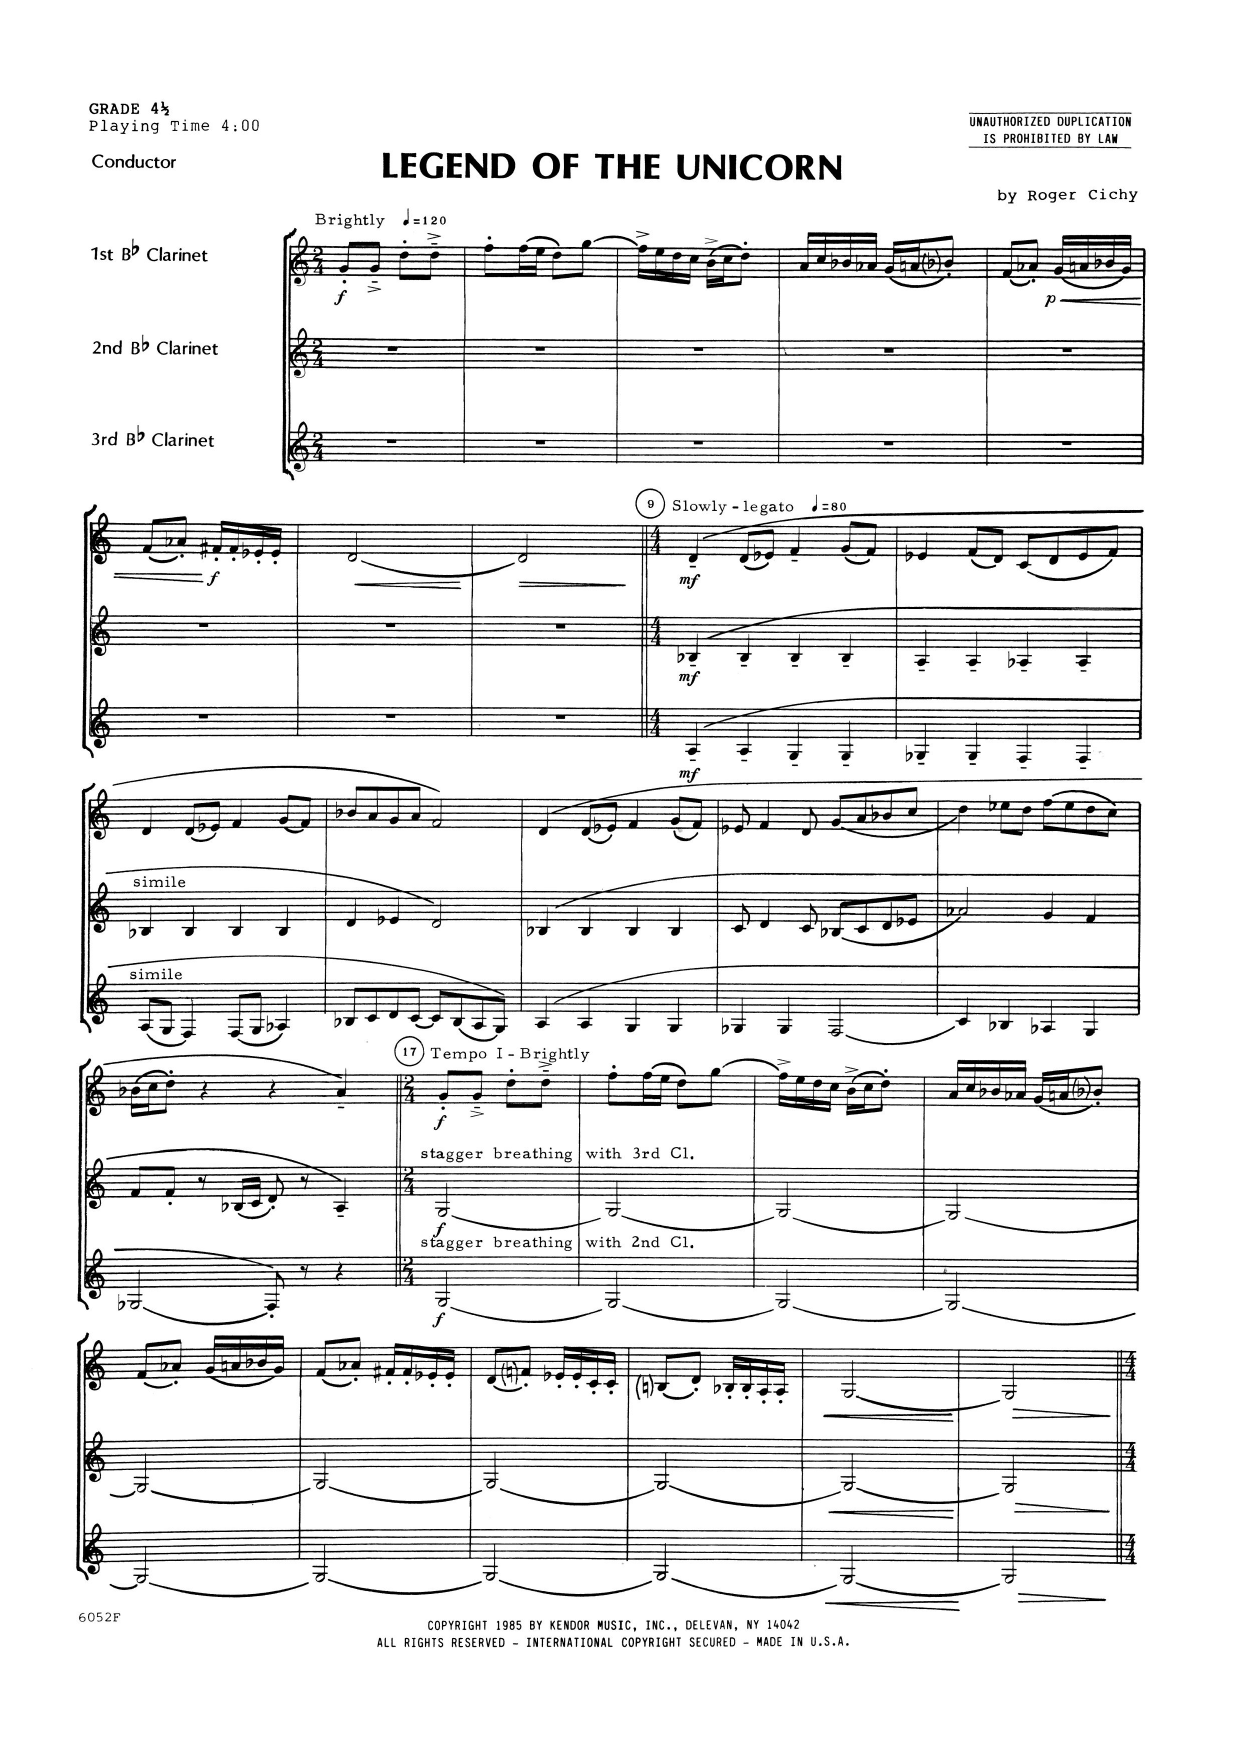 Download Roger Cichy Legend Of The Unicorn - Full Score Sheet Music